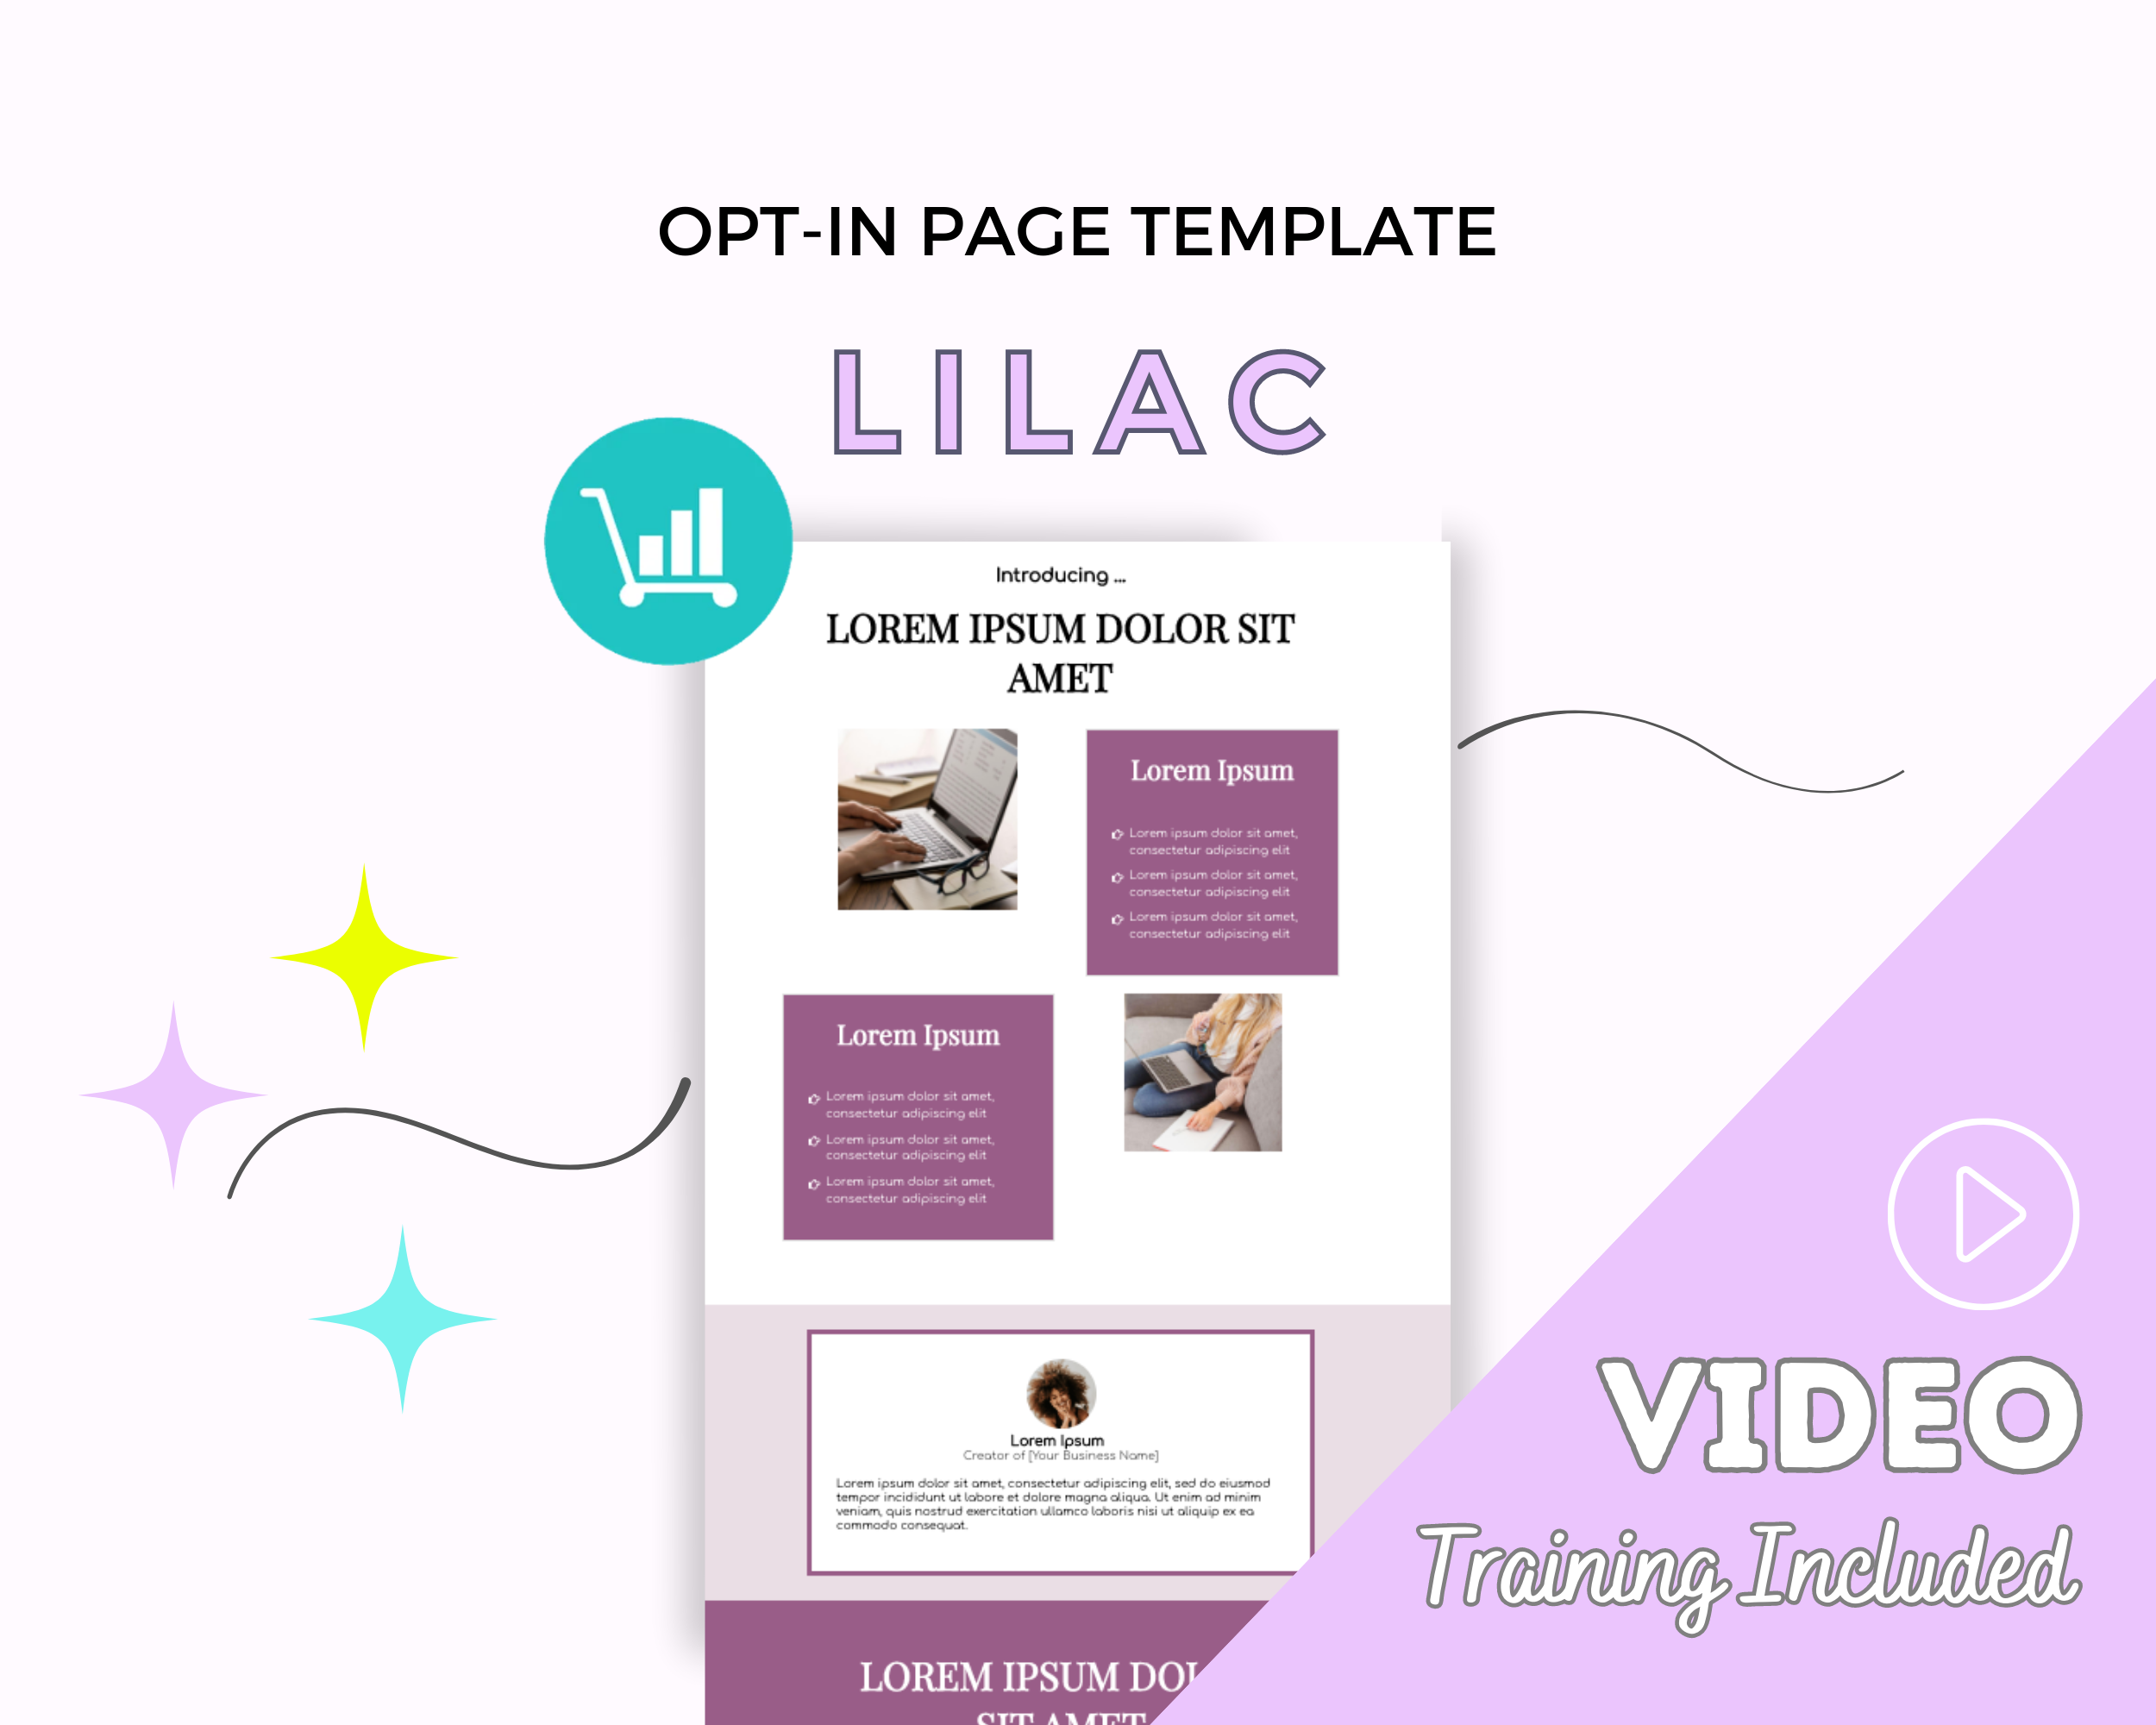 Lilac ThriveCart Opt-In Page Template